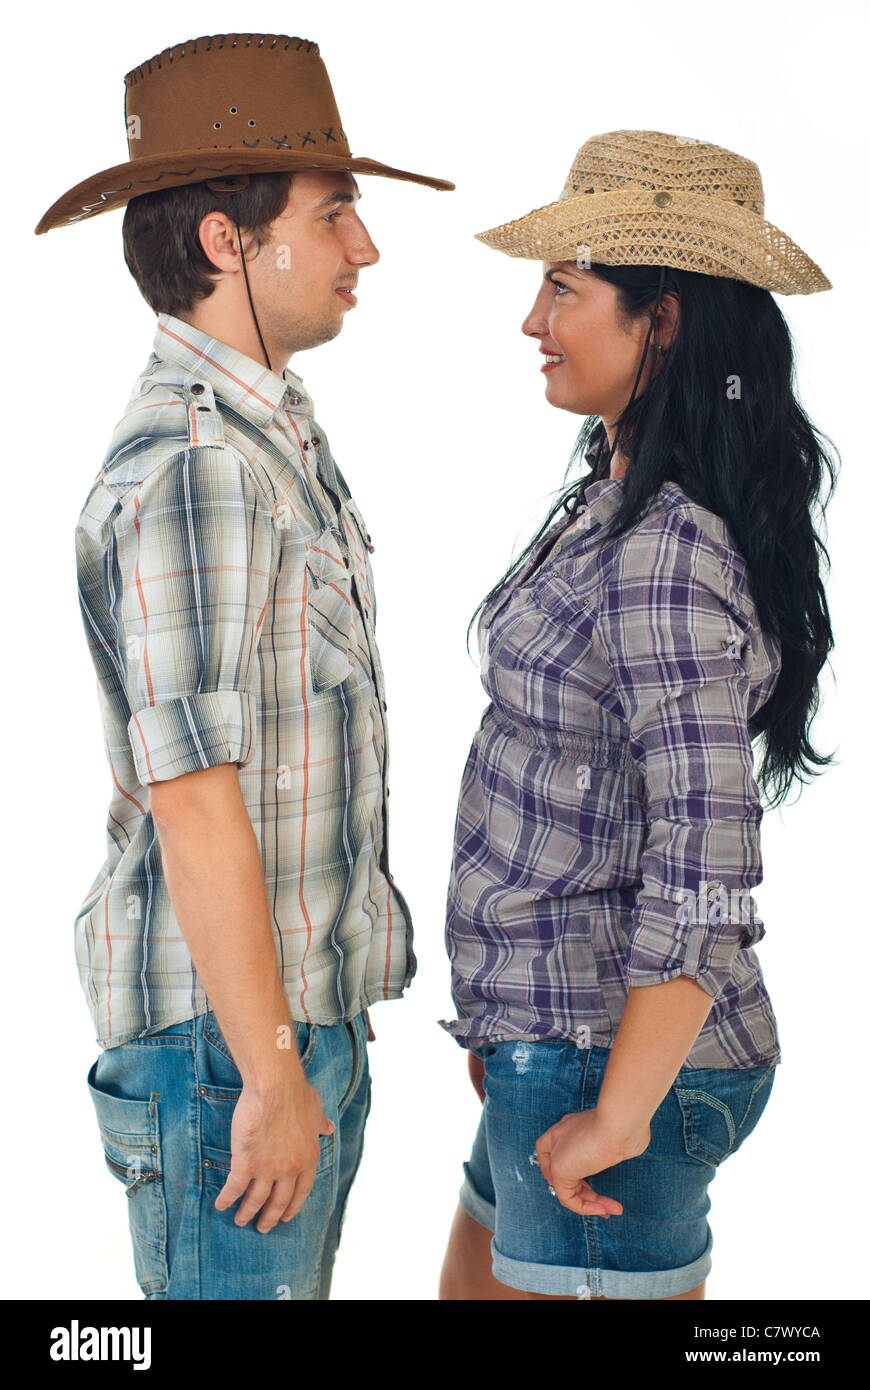 Couple wearing cowboy hats and standing face to face isolated on white background Stock Photo